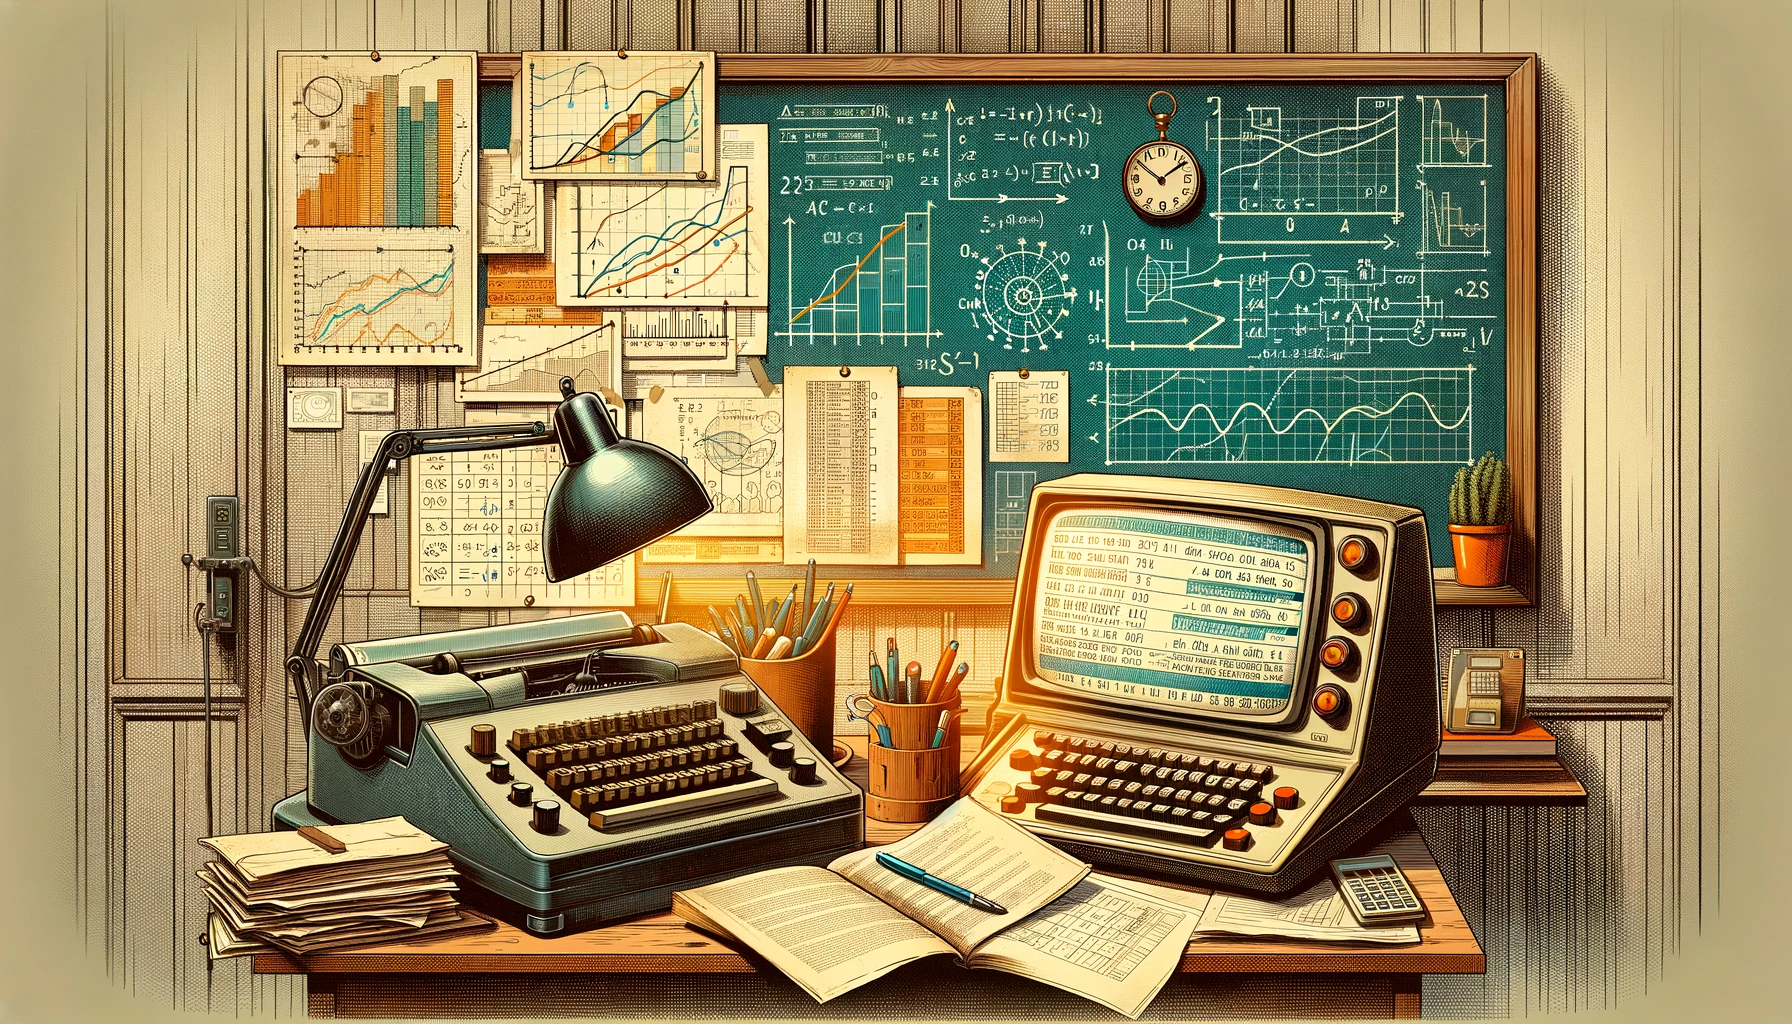 The early days of Quantitative Finance